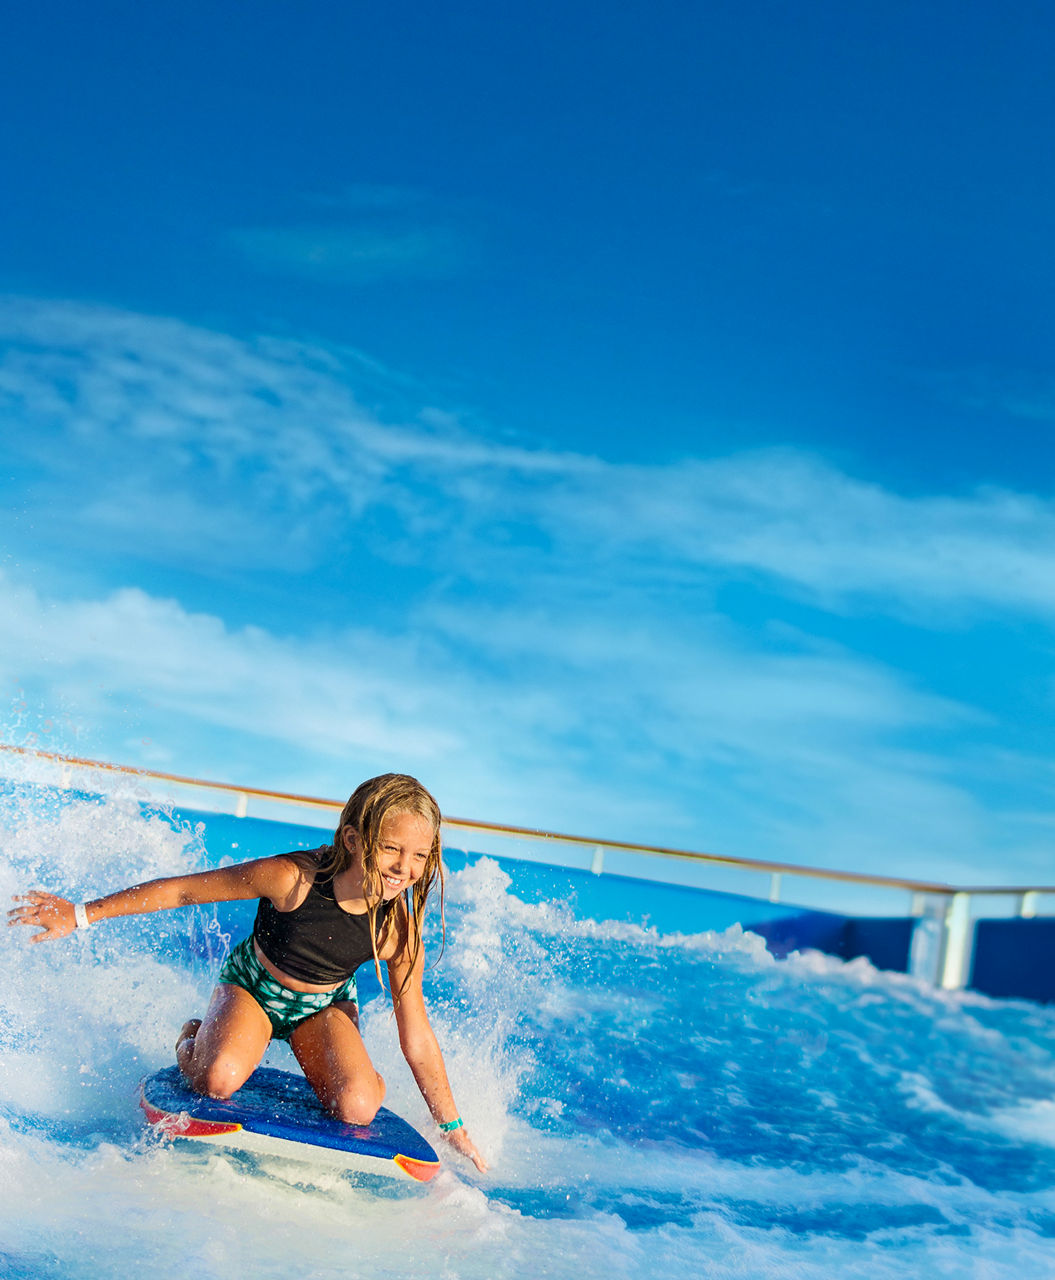 Girl riding a boogie board in Flowrider | HP Mobile